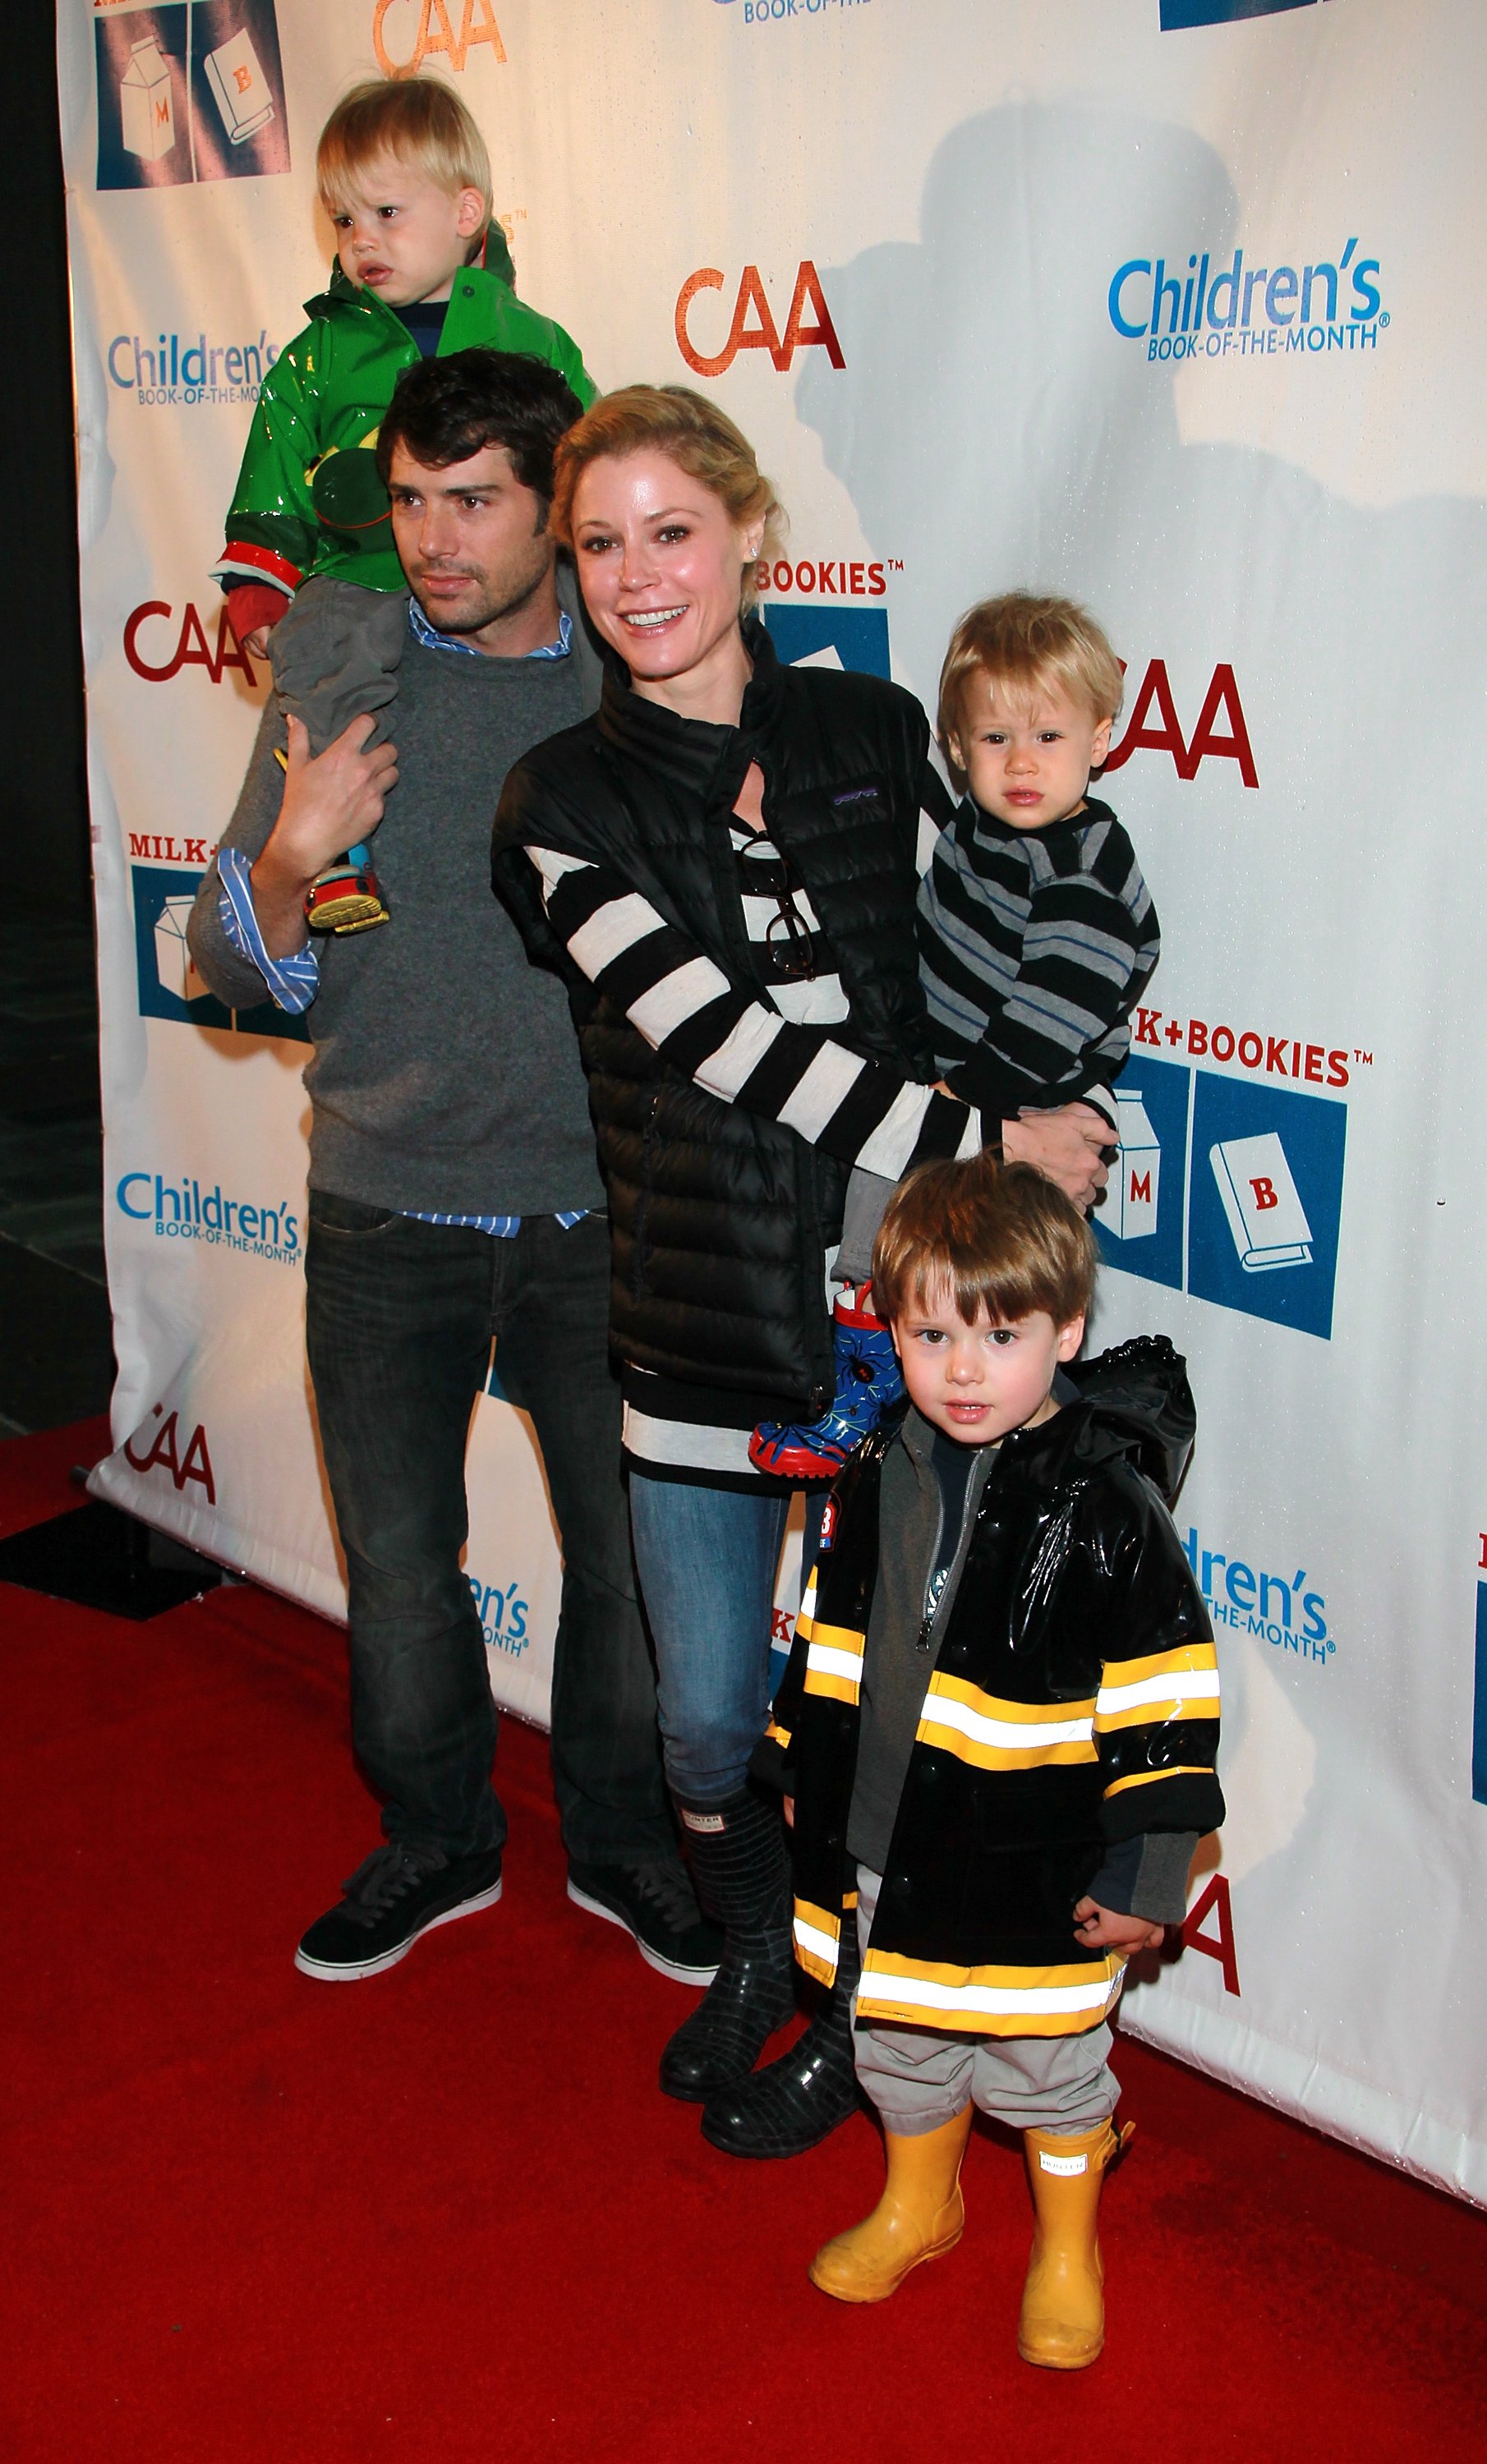 Julie Bowen, her  ex-husband Scott Phillips and sons, Gus Phillips (on shoulders), John Phillips and Oliver Phillips (standing) at the 2nd Annual Milk + Bookies Story Time Celebration in Los Angeles in 2011 | Source: Getty Images